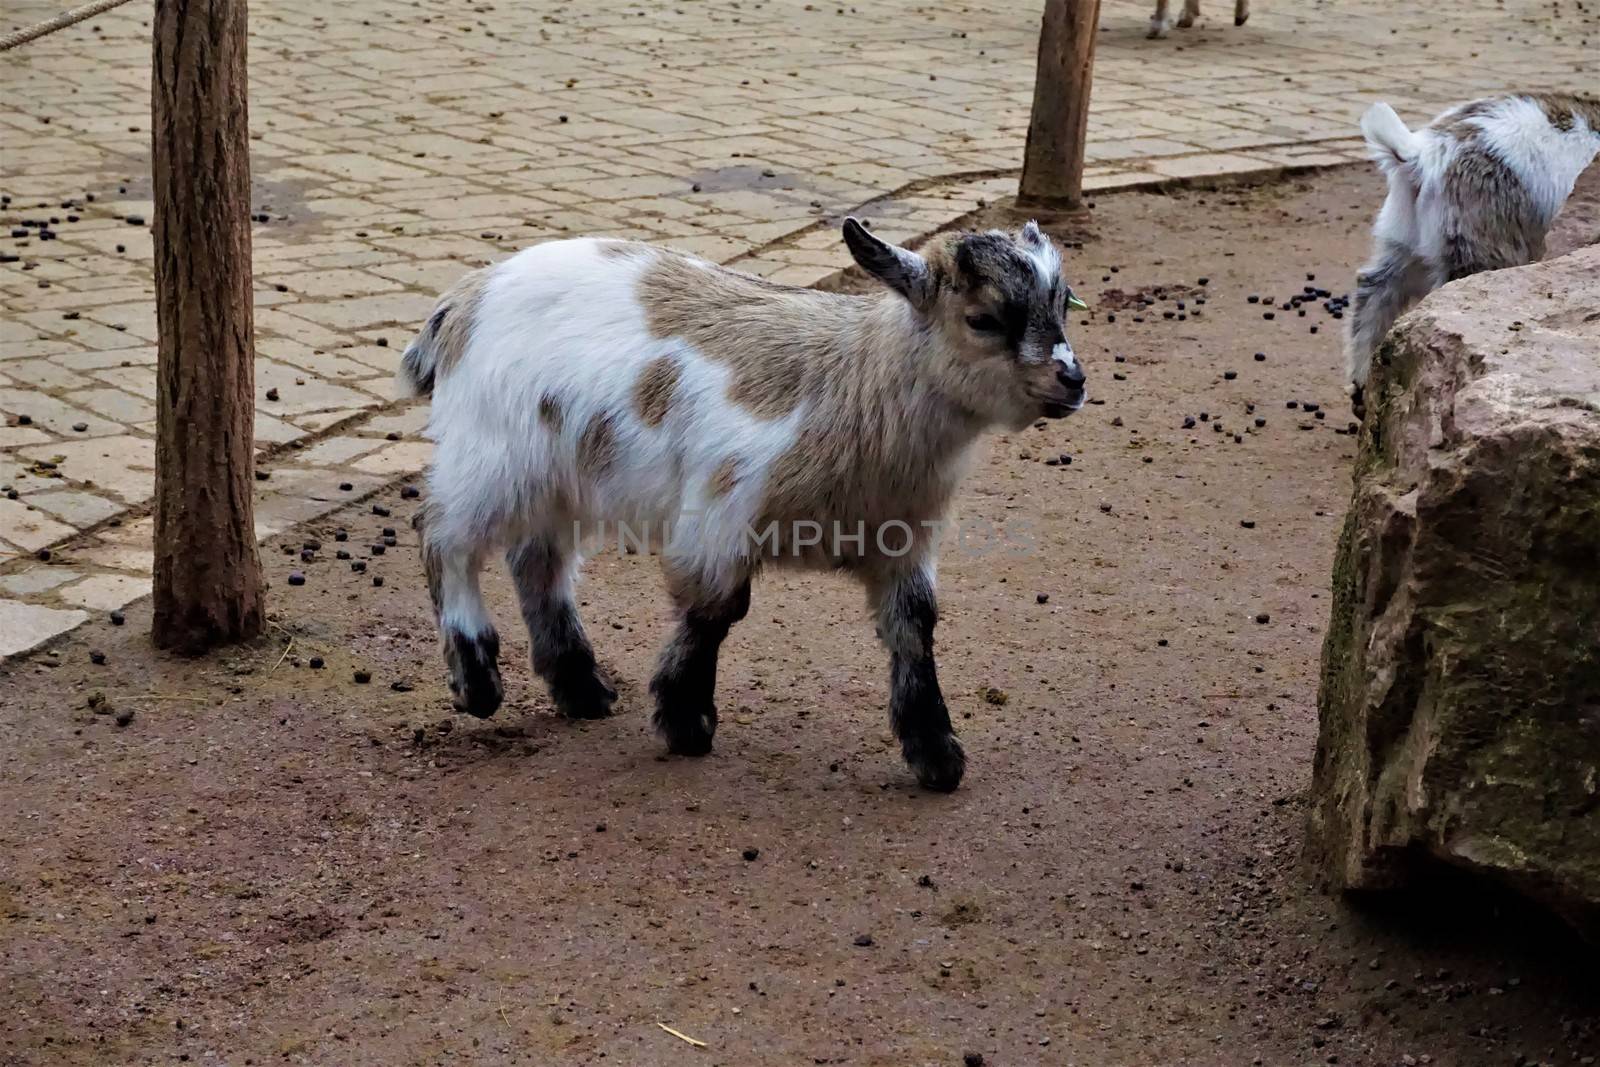 Little baby goat and rock in the zoo